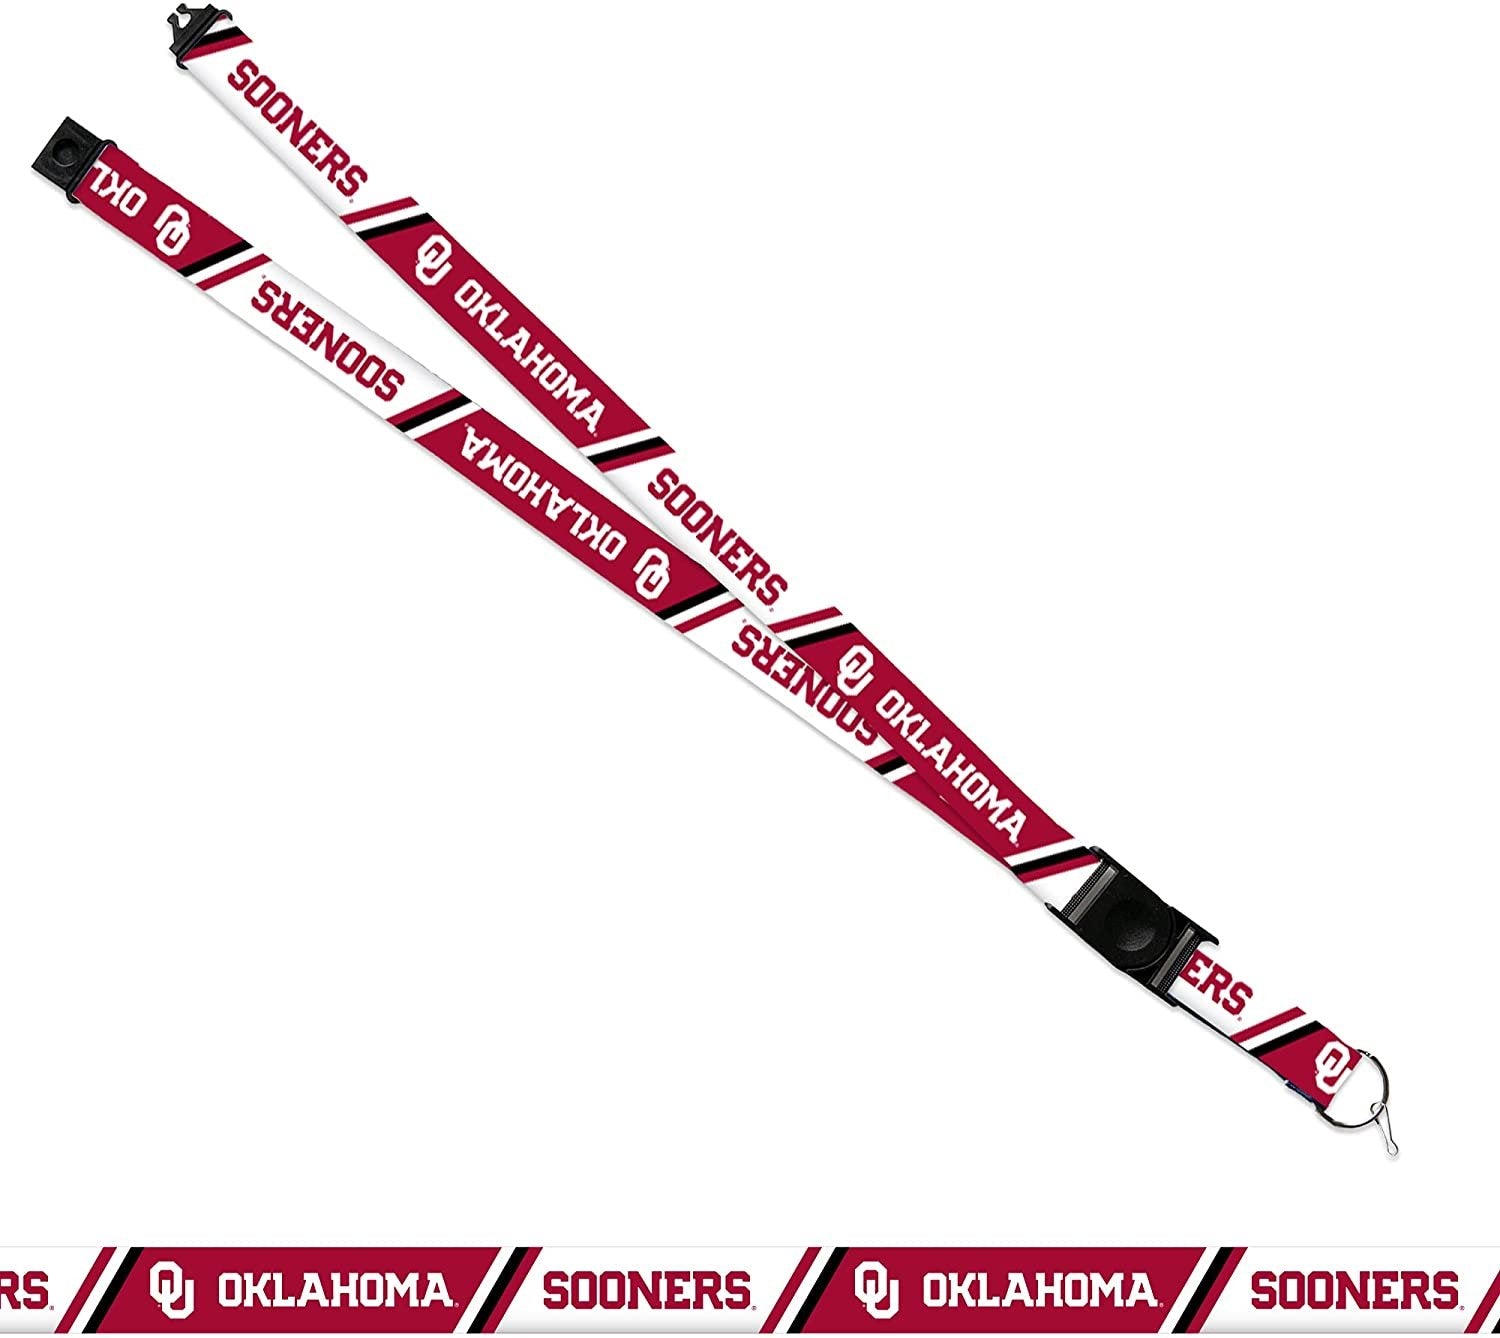 University of Oklahoma Sooners Lanyard Keychain Double Sided 18 Inch Button Clip Safety Breakaway